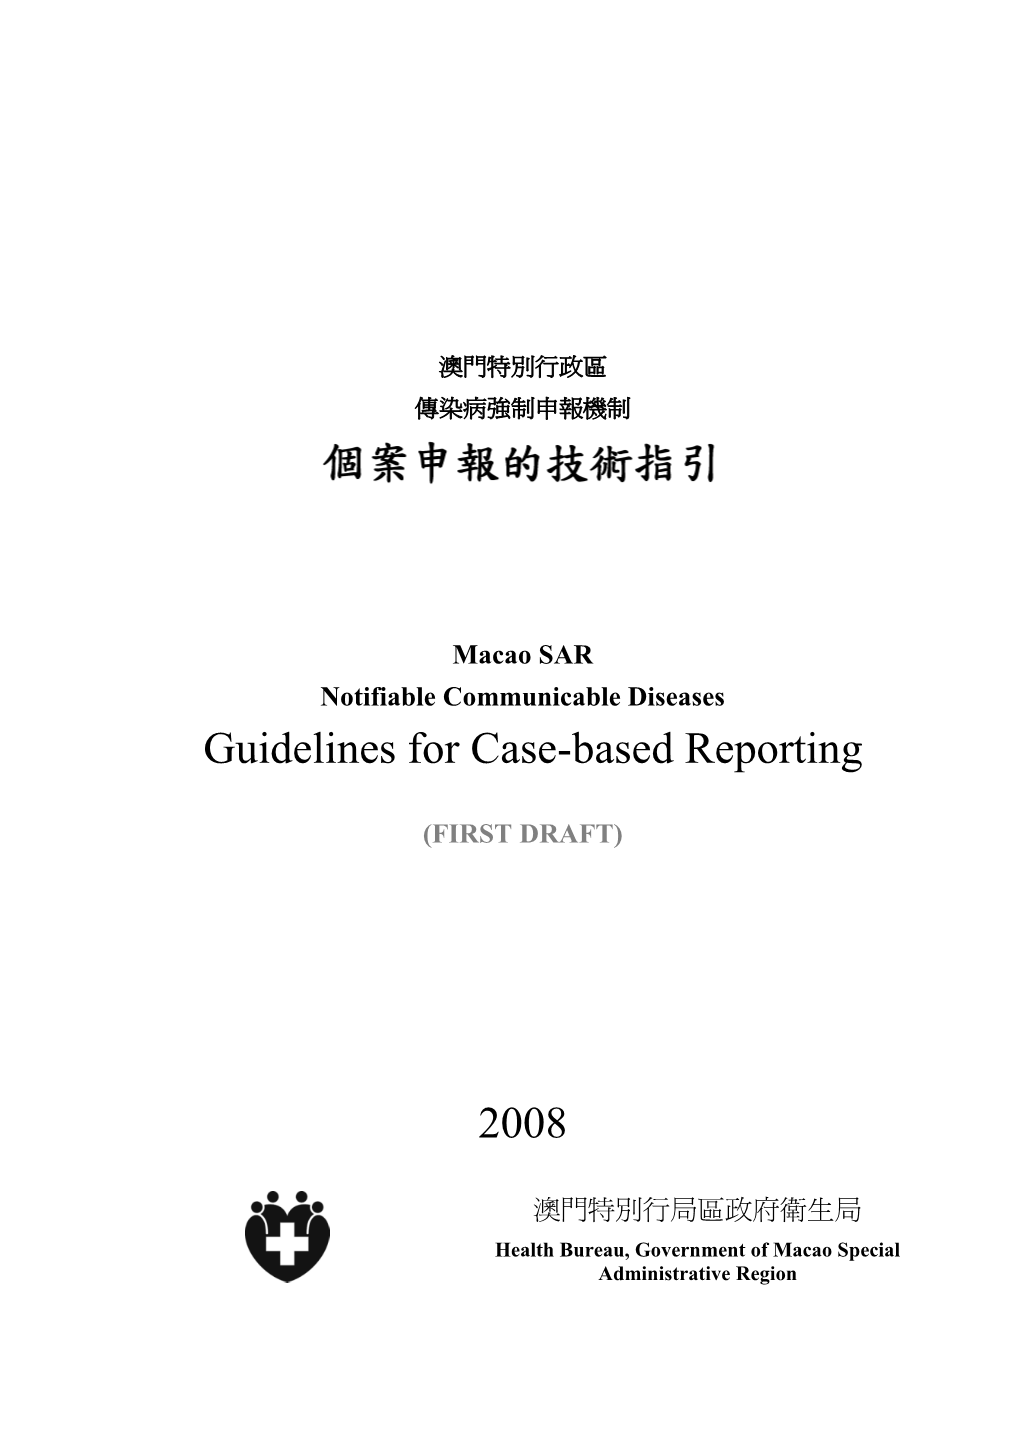 Guidelines for Case-Based Reporting